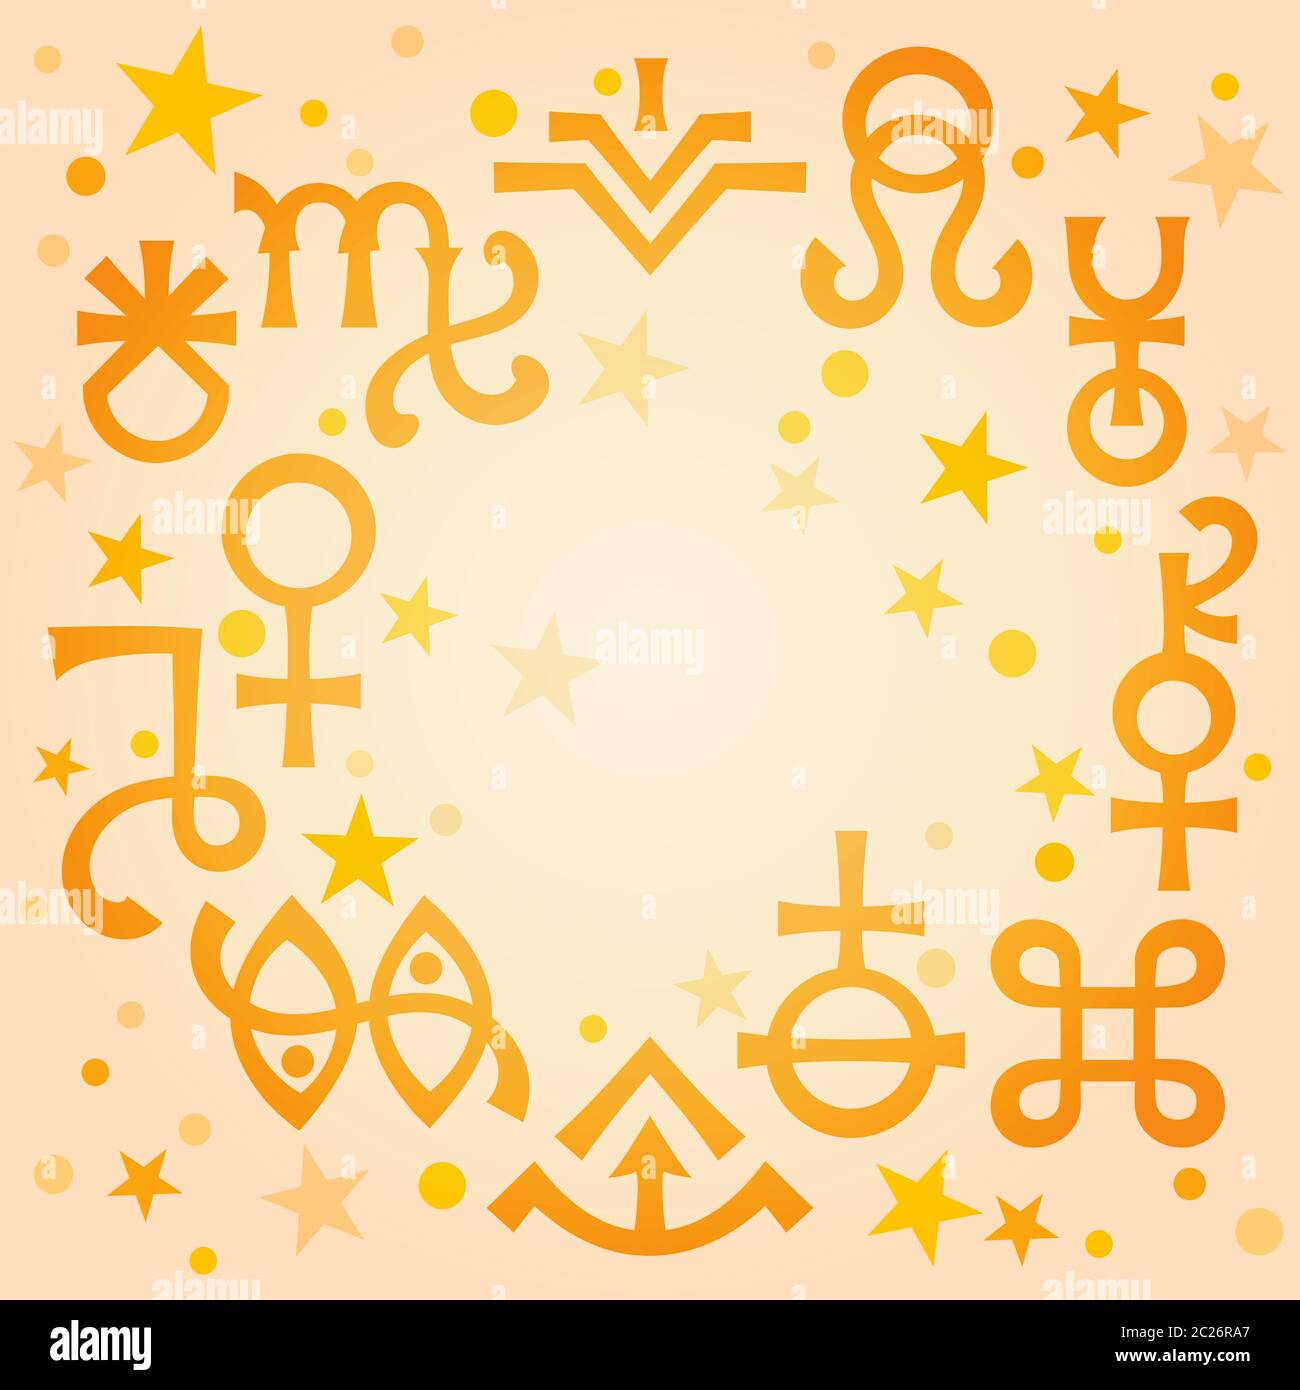 Astrological diadem (astrological signs and occult mystical symbols), warm morning celestial pattern background with stars. Stock Photo